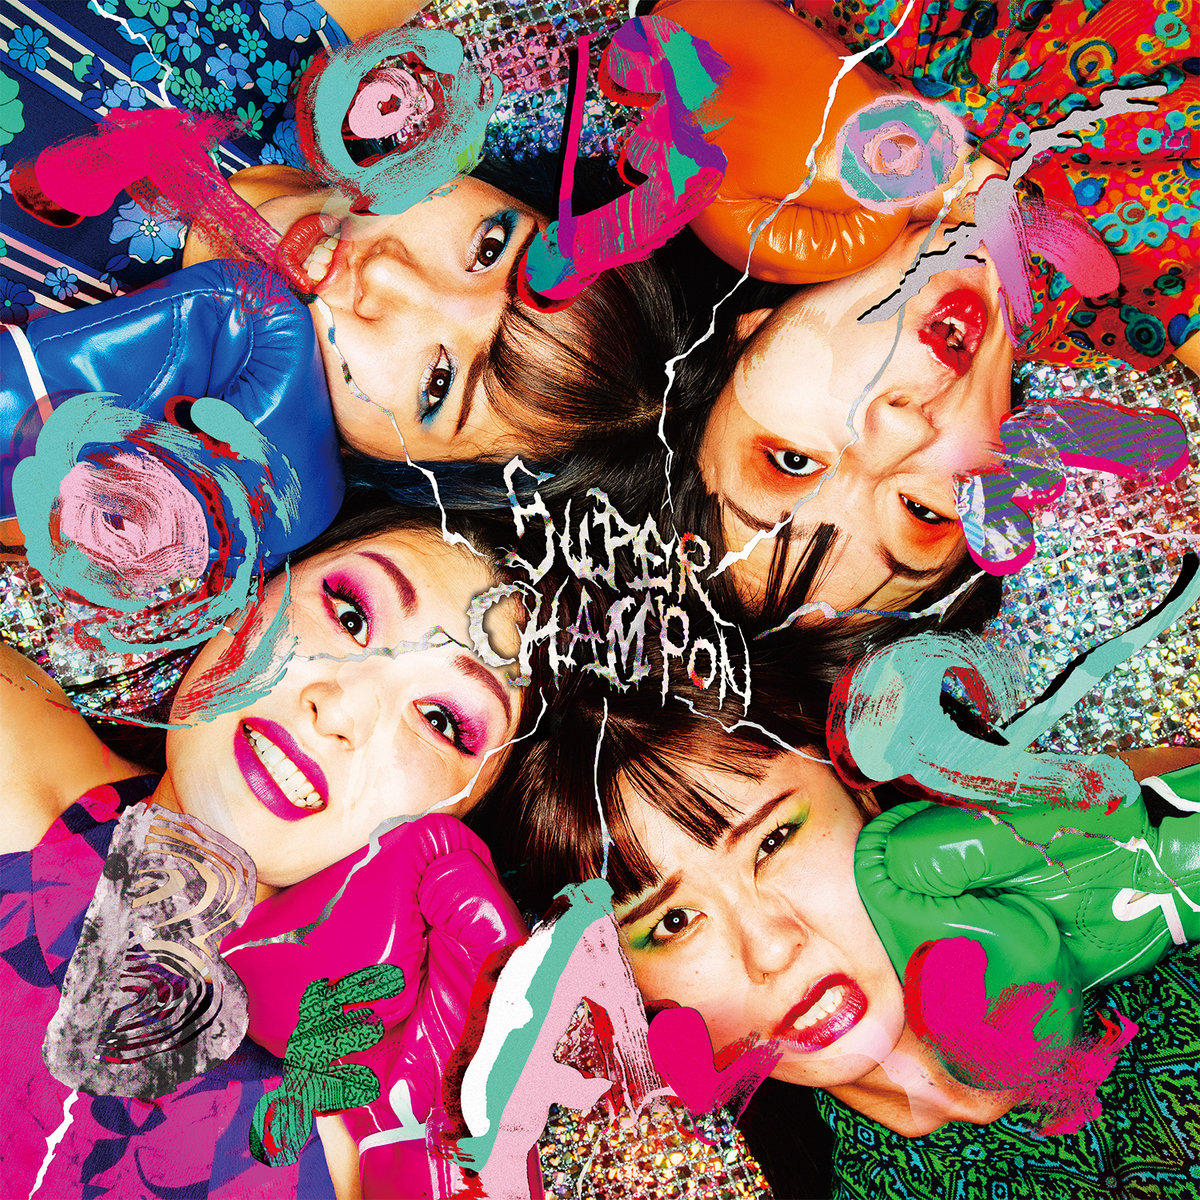 Front cover of “Super Champon” LP by Japanese band Otoboke Beaver